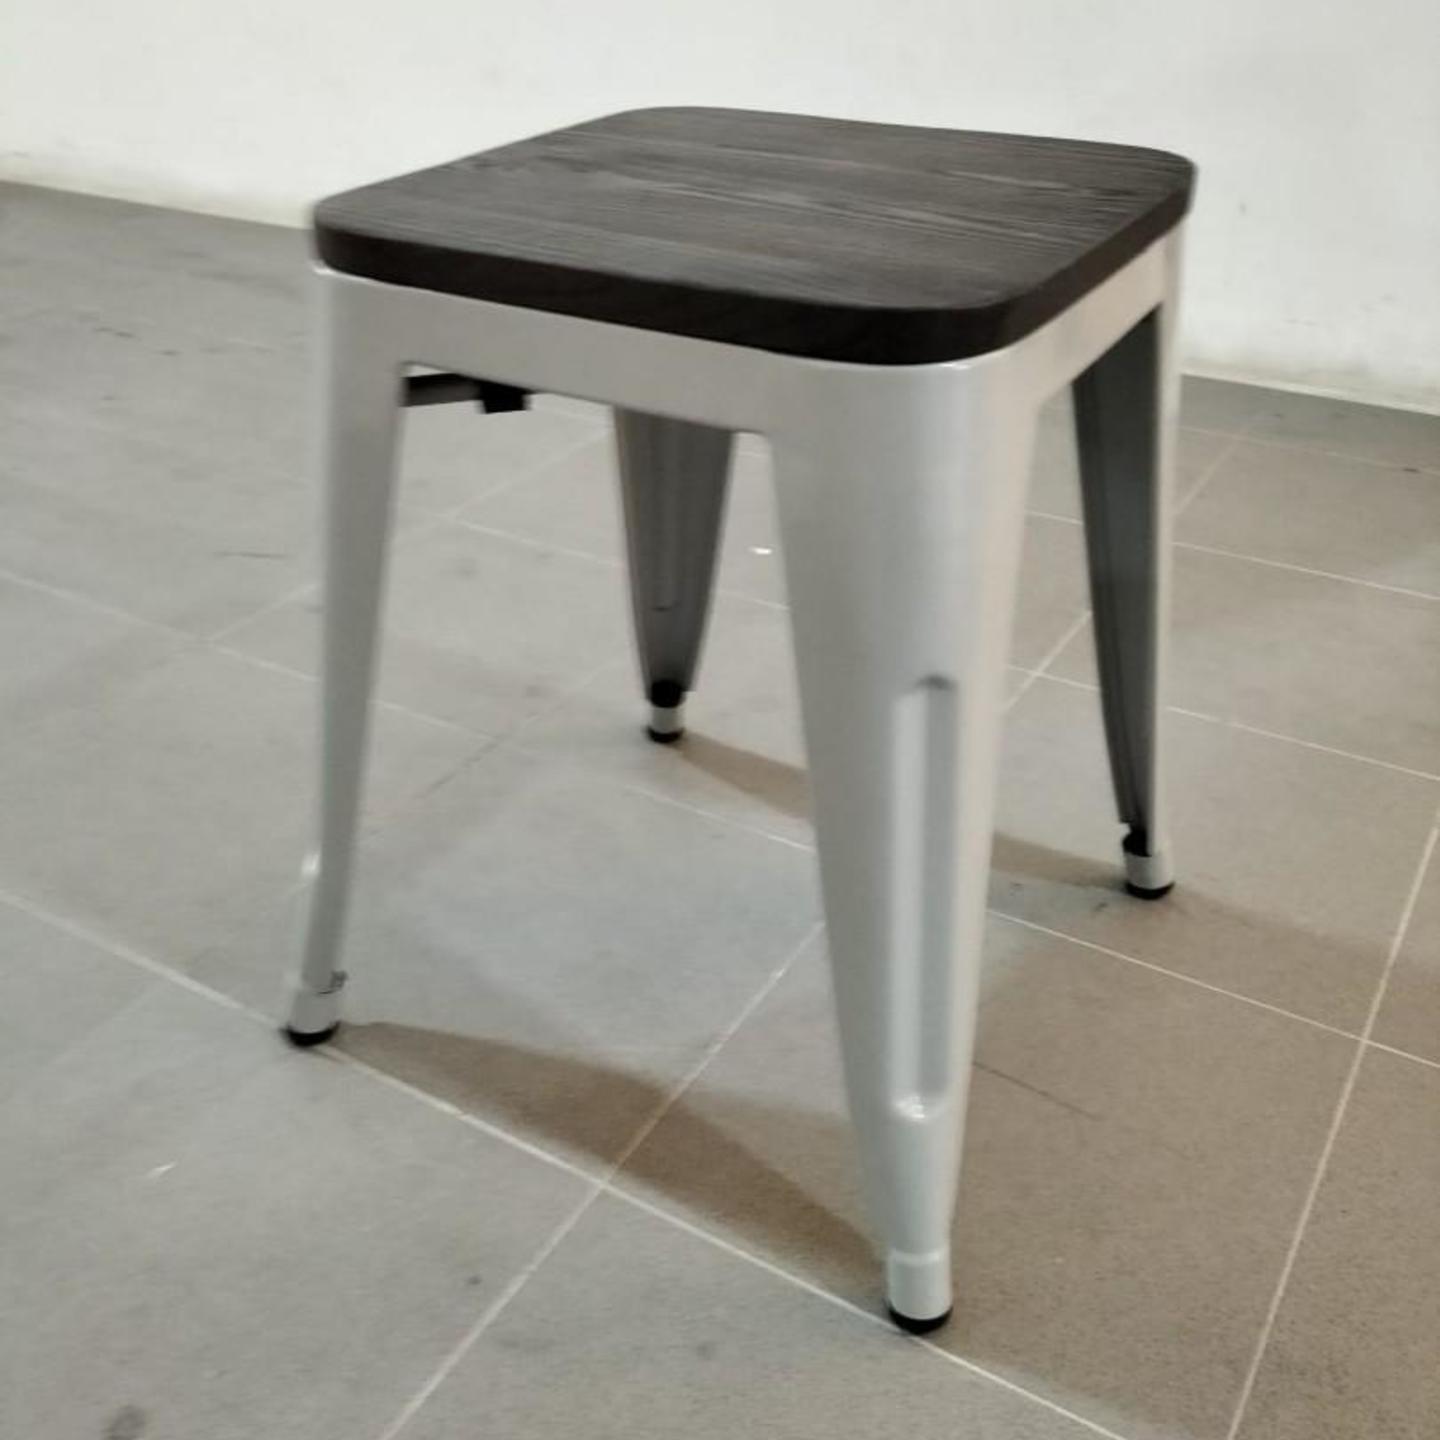 DENVER Short Metal Stool in SILVER with Wooden Top